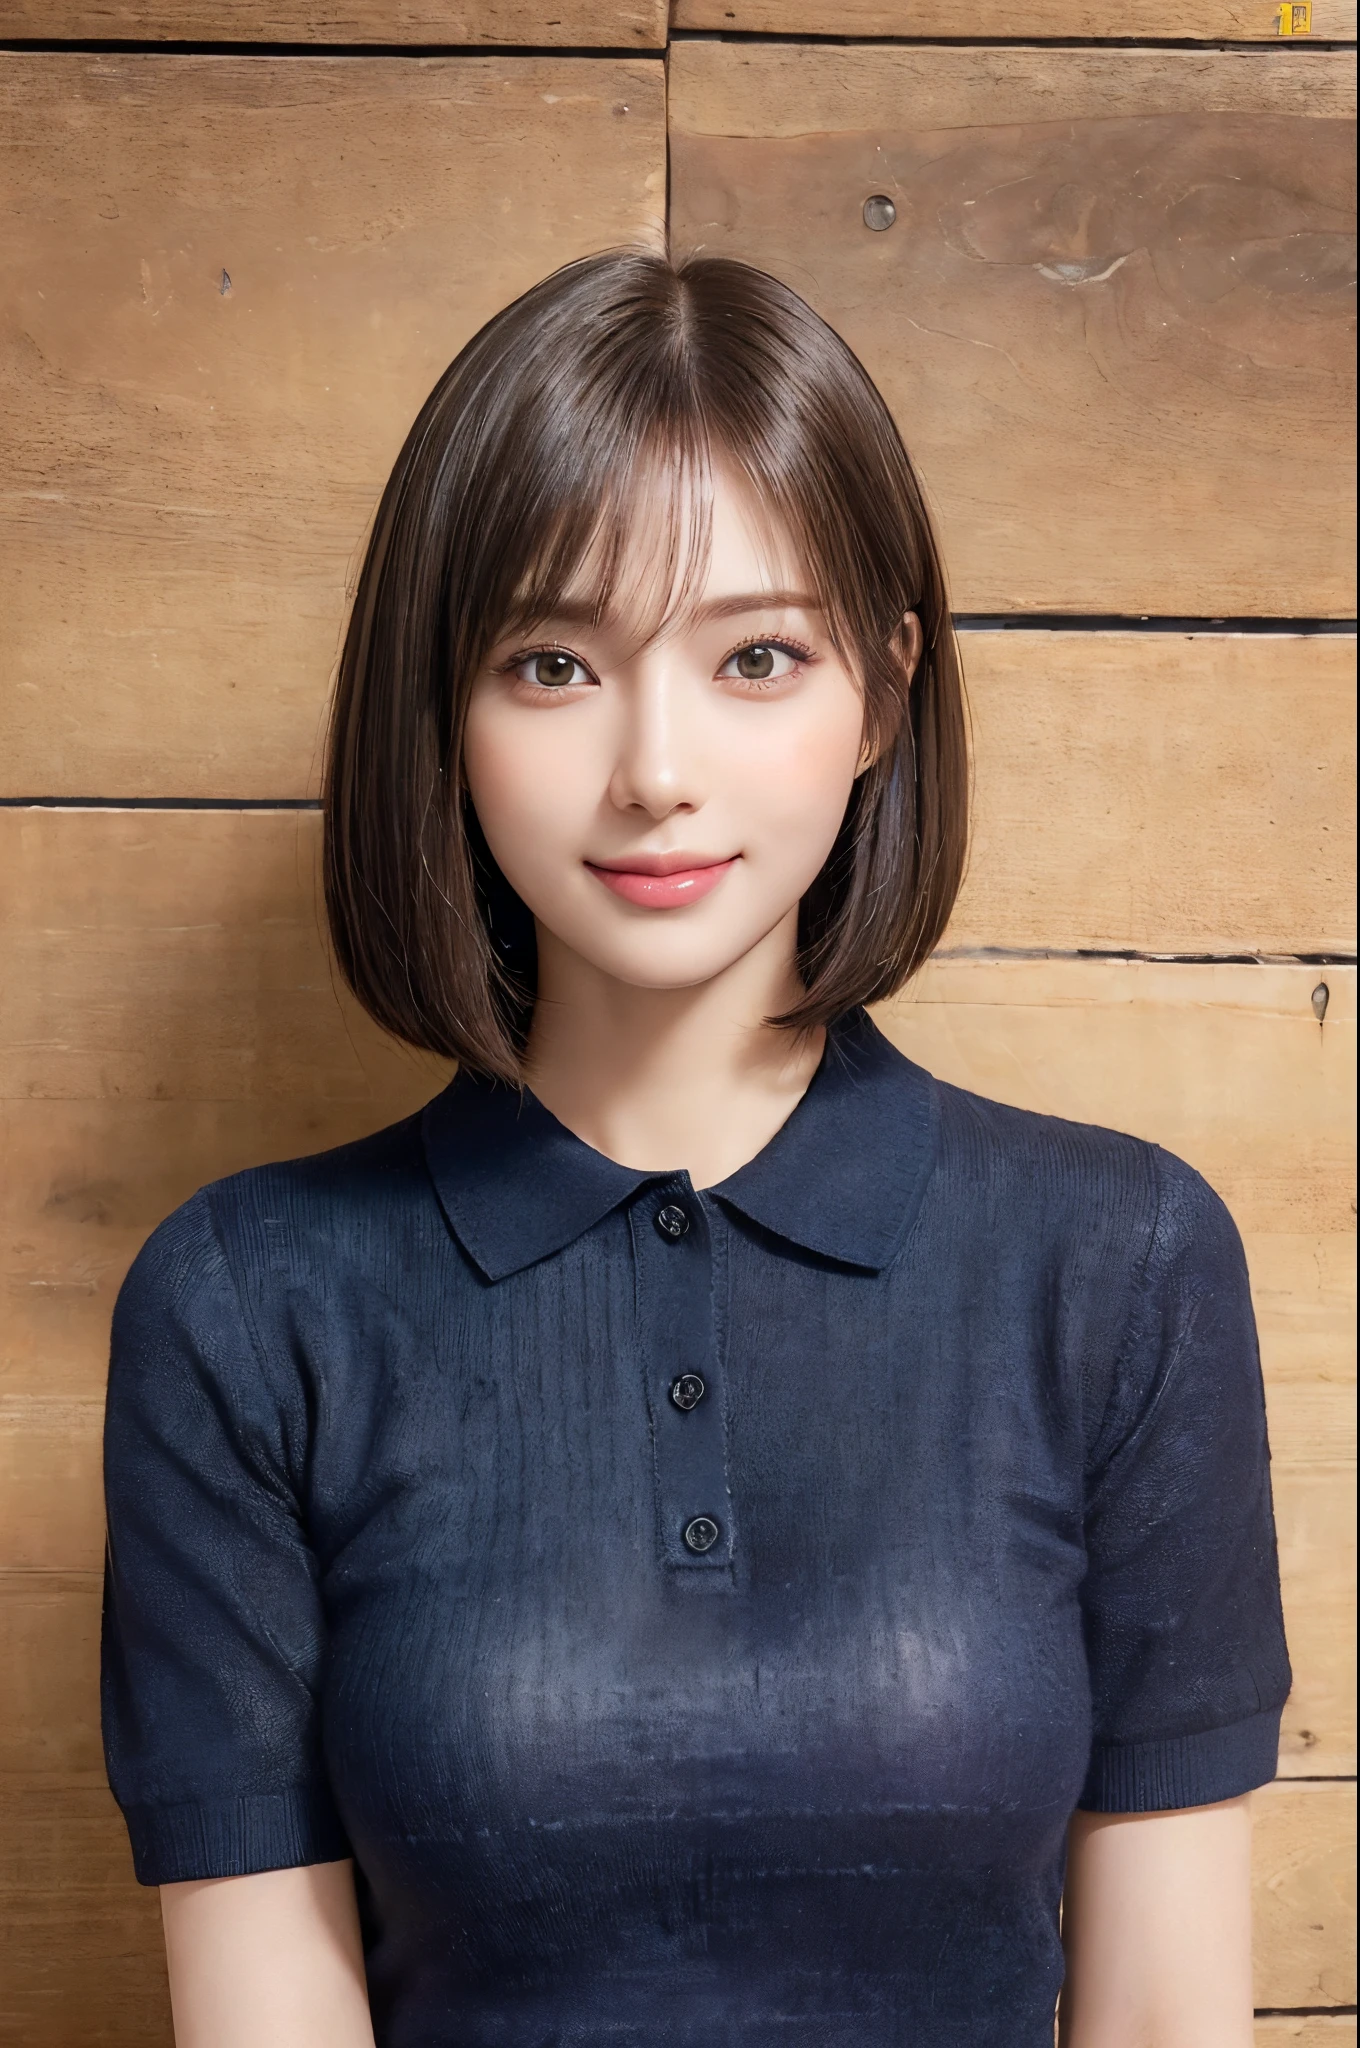 ((Detailed and super high quality:1.3)),((Realistic and super high quality:1.3)),((Photoreality:1.3)),((Very realistic textures:1.3)), japanes、Fair and beautiful skin、((Beautiful straight bob hair:1.5))、((Super Detail Face))Eye of Detail、double eyelid、sharp focus:1.2 Light brown hair、top-quality、超A high resolution、(Photorealista:1.4)、Highly detailed and professional lighting smile、Gentle expression、((Shy smile:1.3)) very classy and intelligent　stylish and neat　Trend Fashion　((Dark navy　Luxury short sleeve knit polo shirt))、((21years old:1.3)) 　((realistic skin textures:1.5)) Amazing close-up of a very beautiful face　Beautiful schoolgirl　Beautiful bob hair down to the tips　Slender body type　kawaii